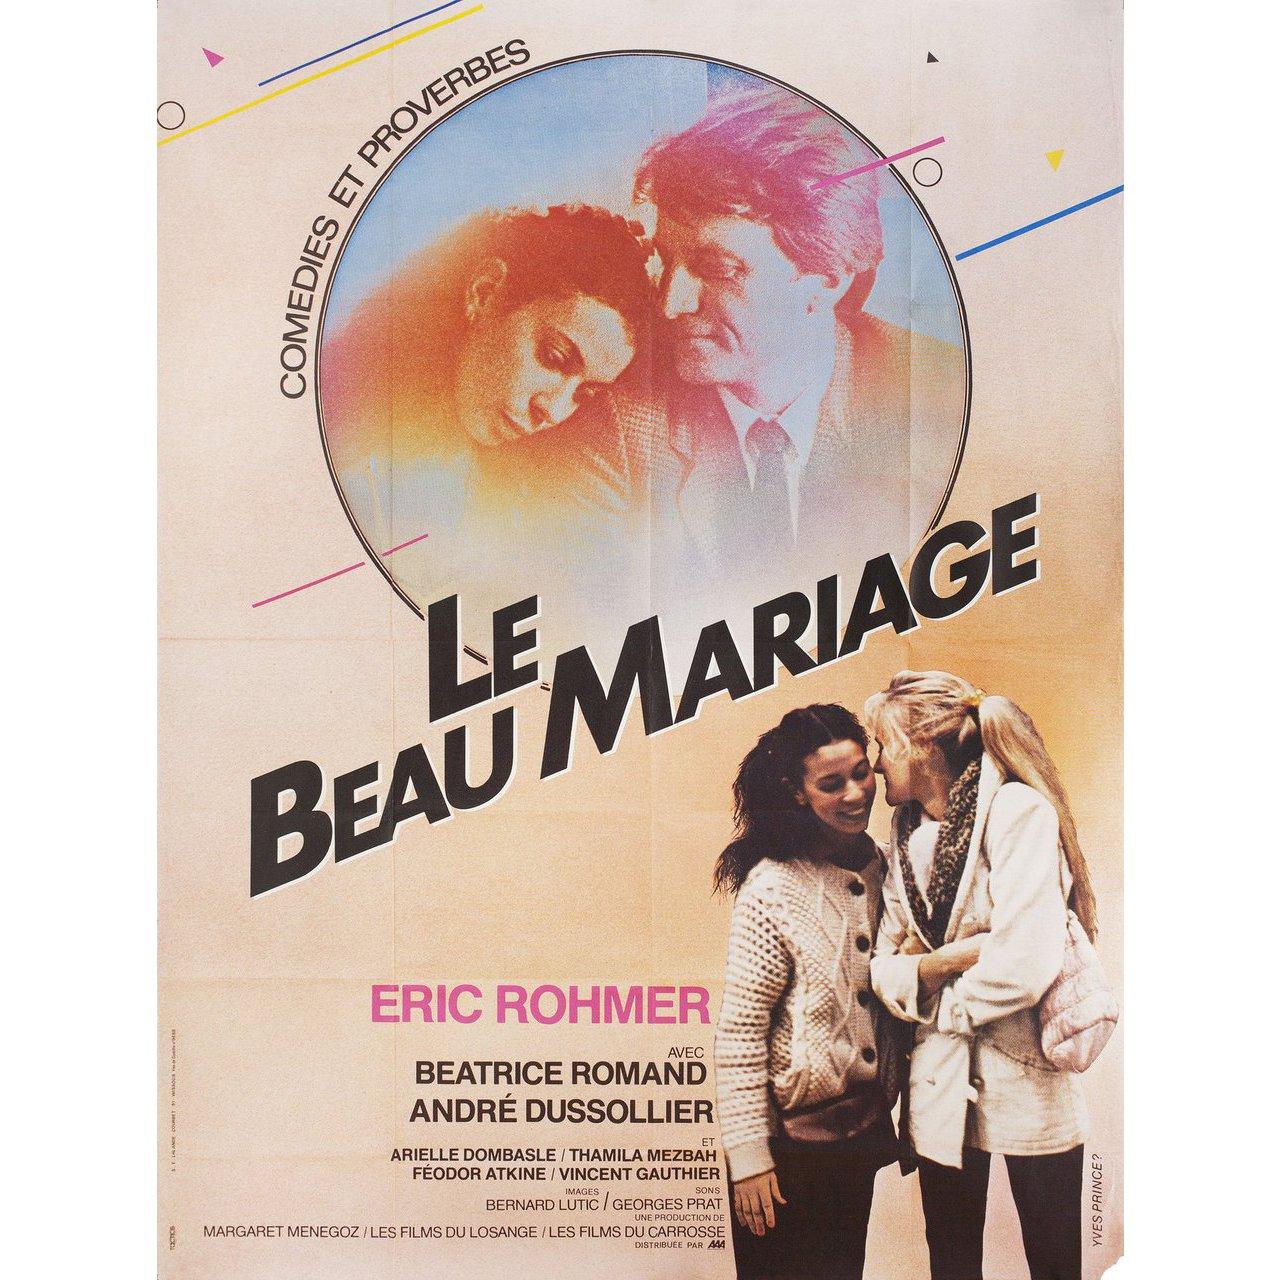 Original 1982 French grande poster by Yves Prince for the film Le beau mariage directed by Eric Rohmer with Beatrice Romand / Andre Dussollier / Feodor Atkine / Arielle Dombasle. Very Good condition, folded with missing corner. Many original posters